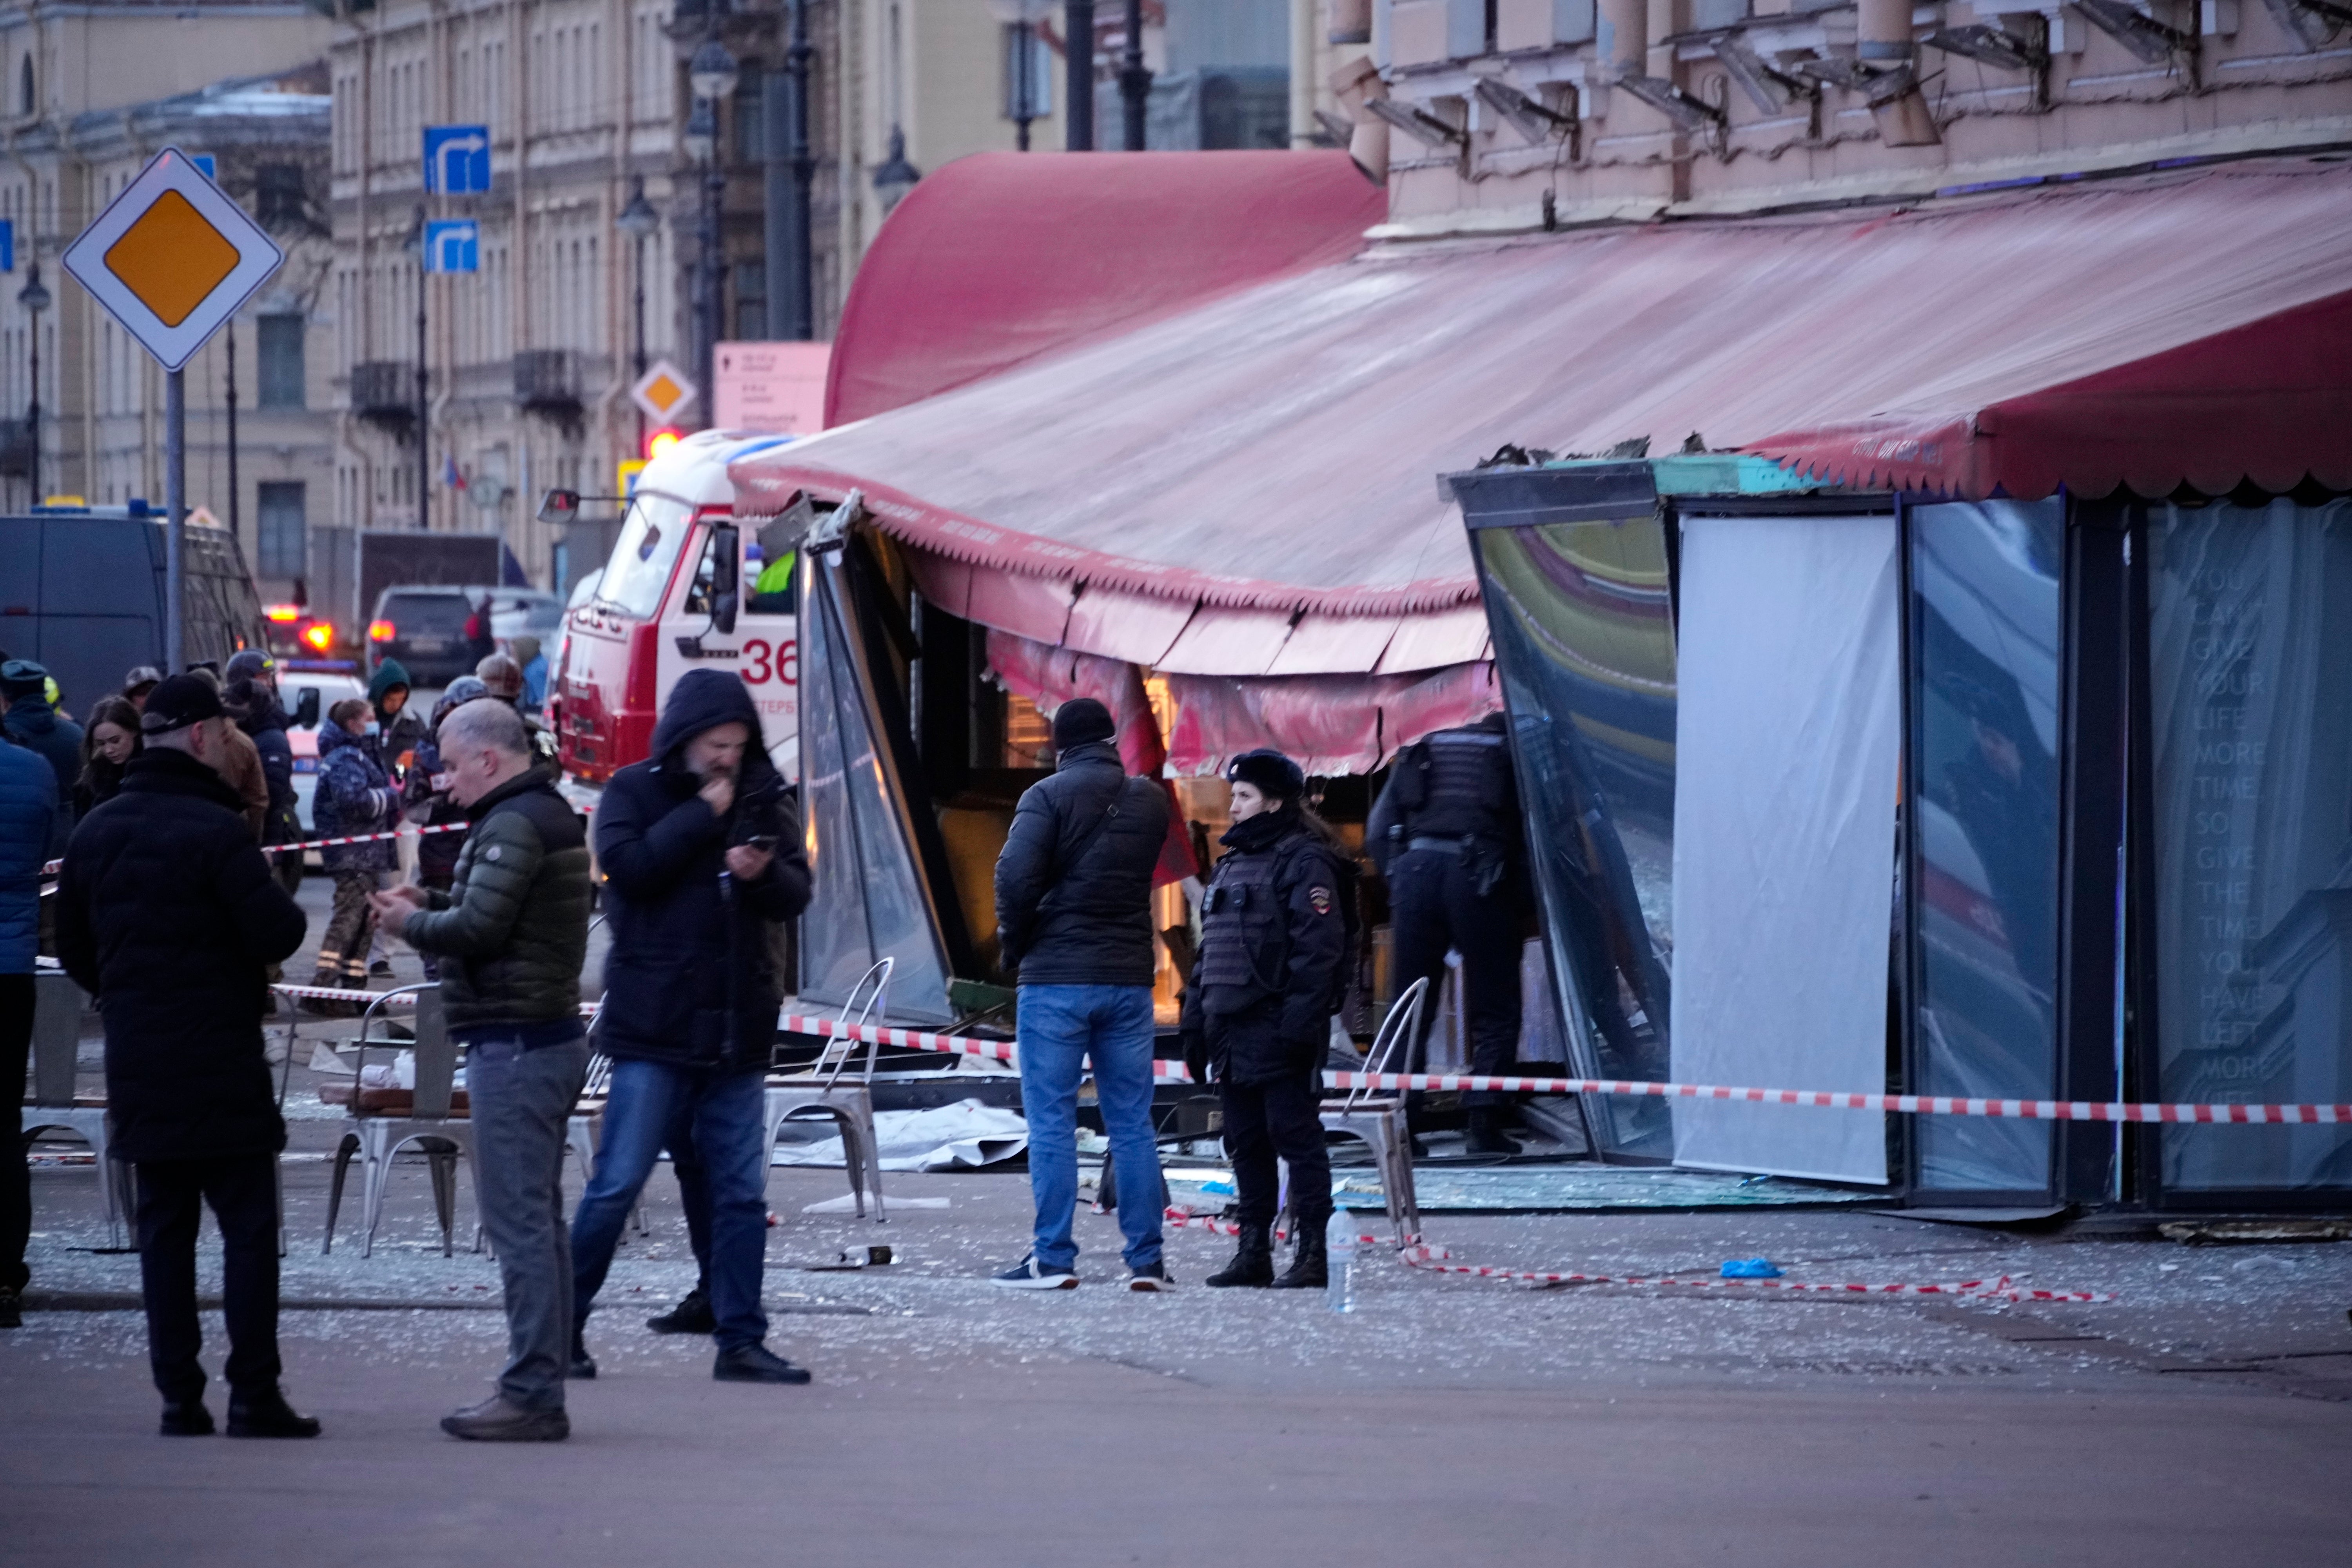 Russian investigators and police officers stand at the side of an explosion at a cafe in St. Petersburg, Russia